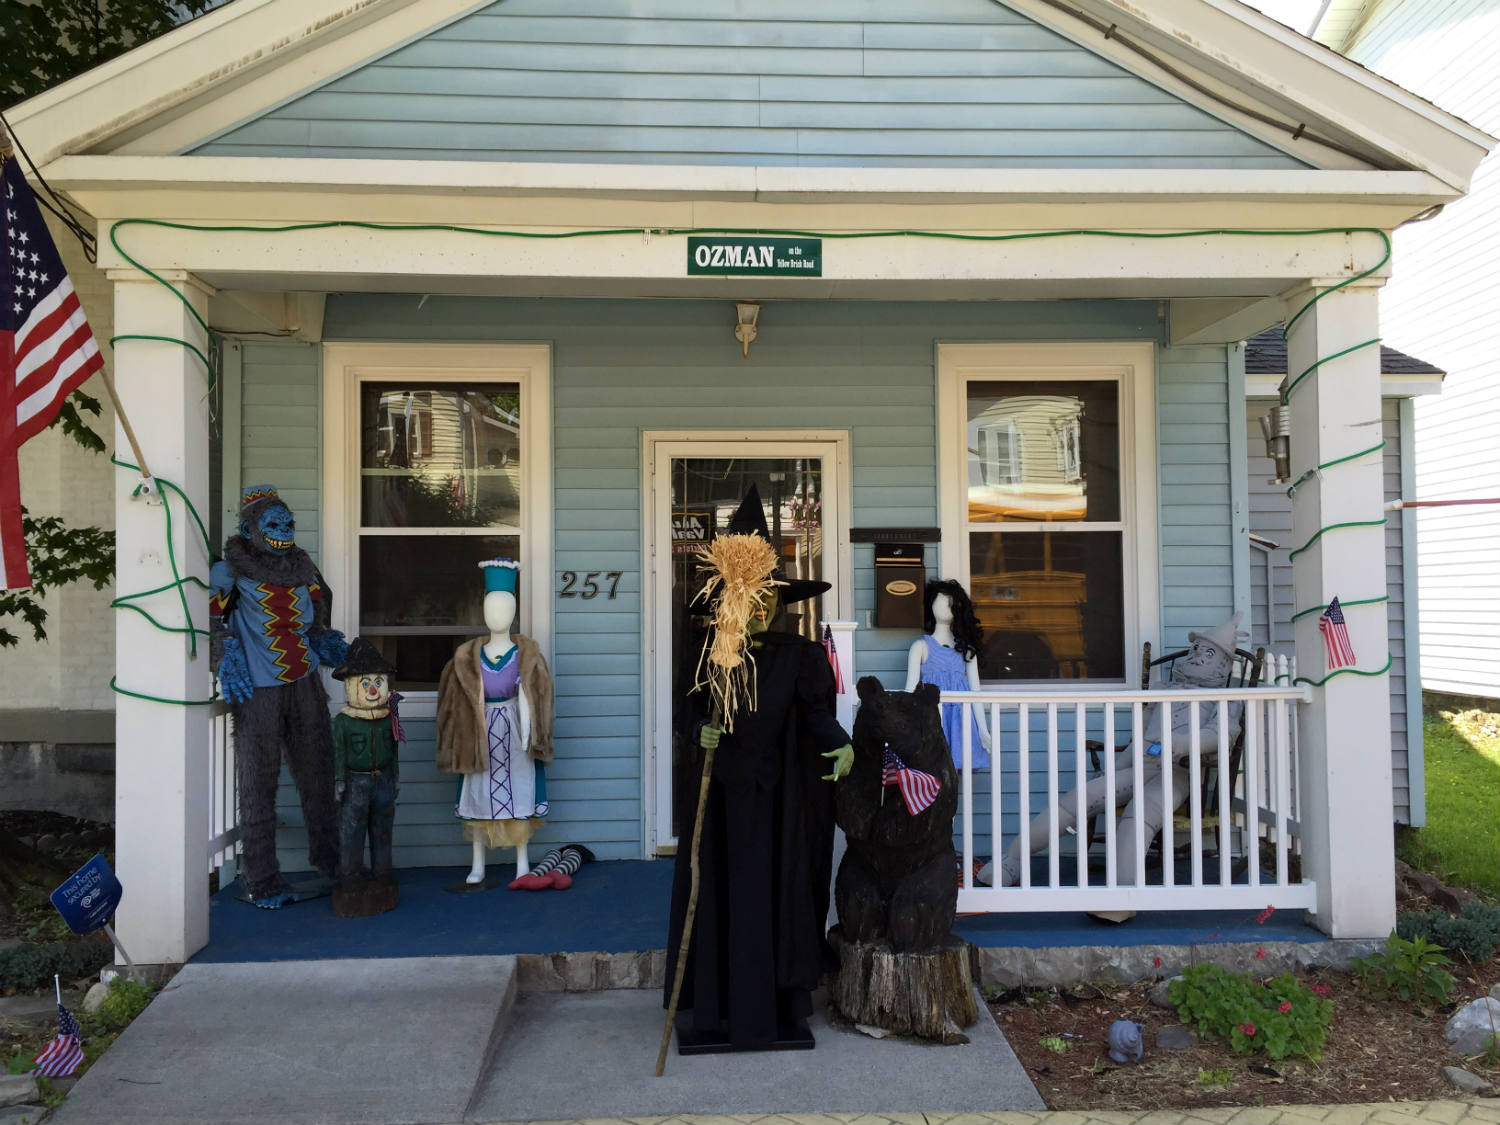 Wizard of Oz Fan Front Porch in the Village of Chittenango, New York